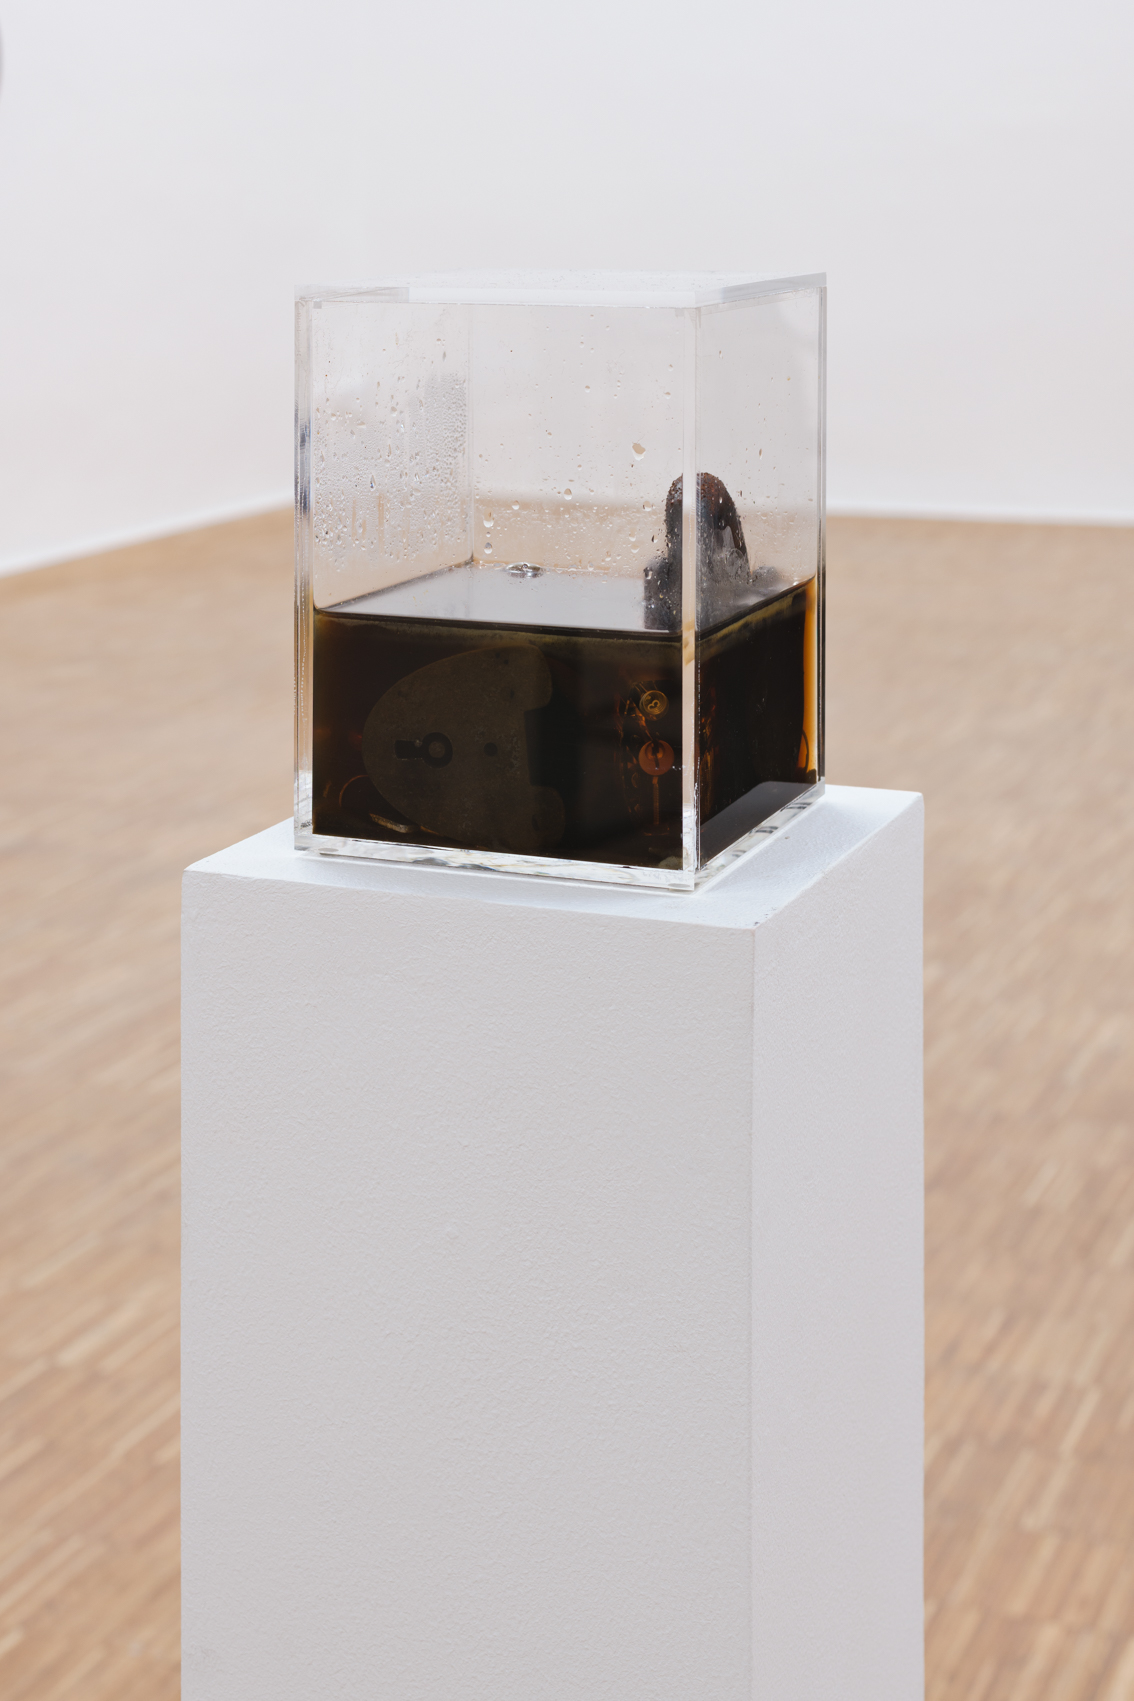 Arc M Sch, The Despair Objects (for Robert), 2022, plexiglass display case, collected padlocks, urine, 18,5 x 14 x 14 cm, courtesy of the artist